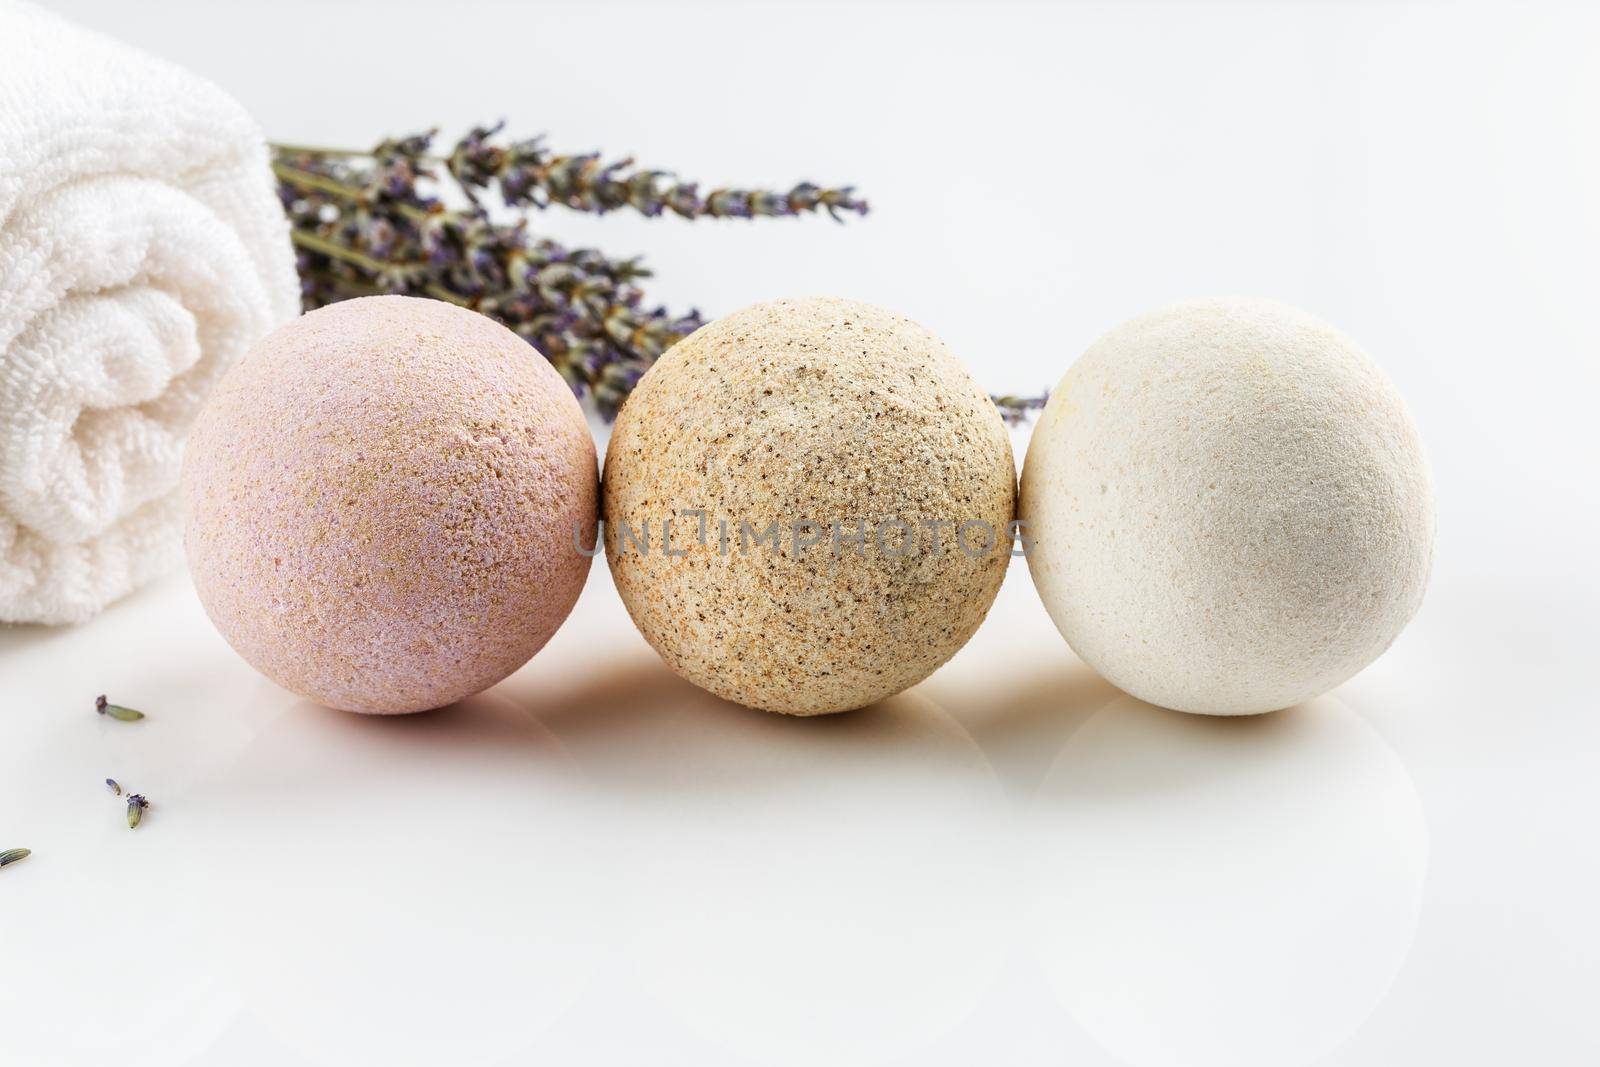 Homemade salt bath bombs with dry lavender flowers by Syvanych